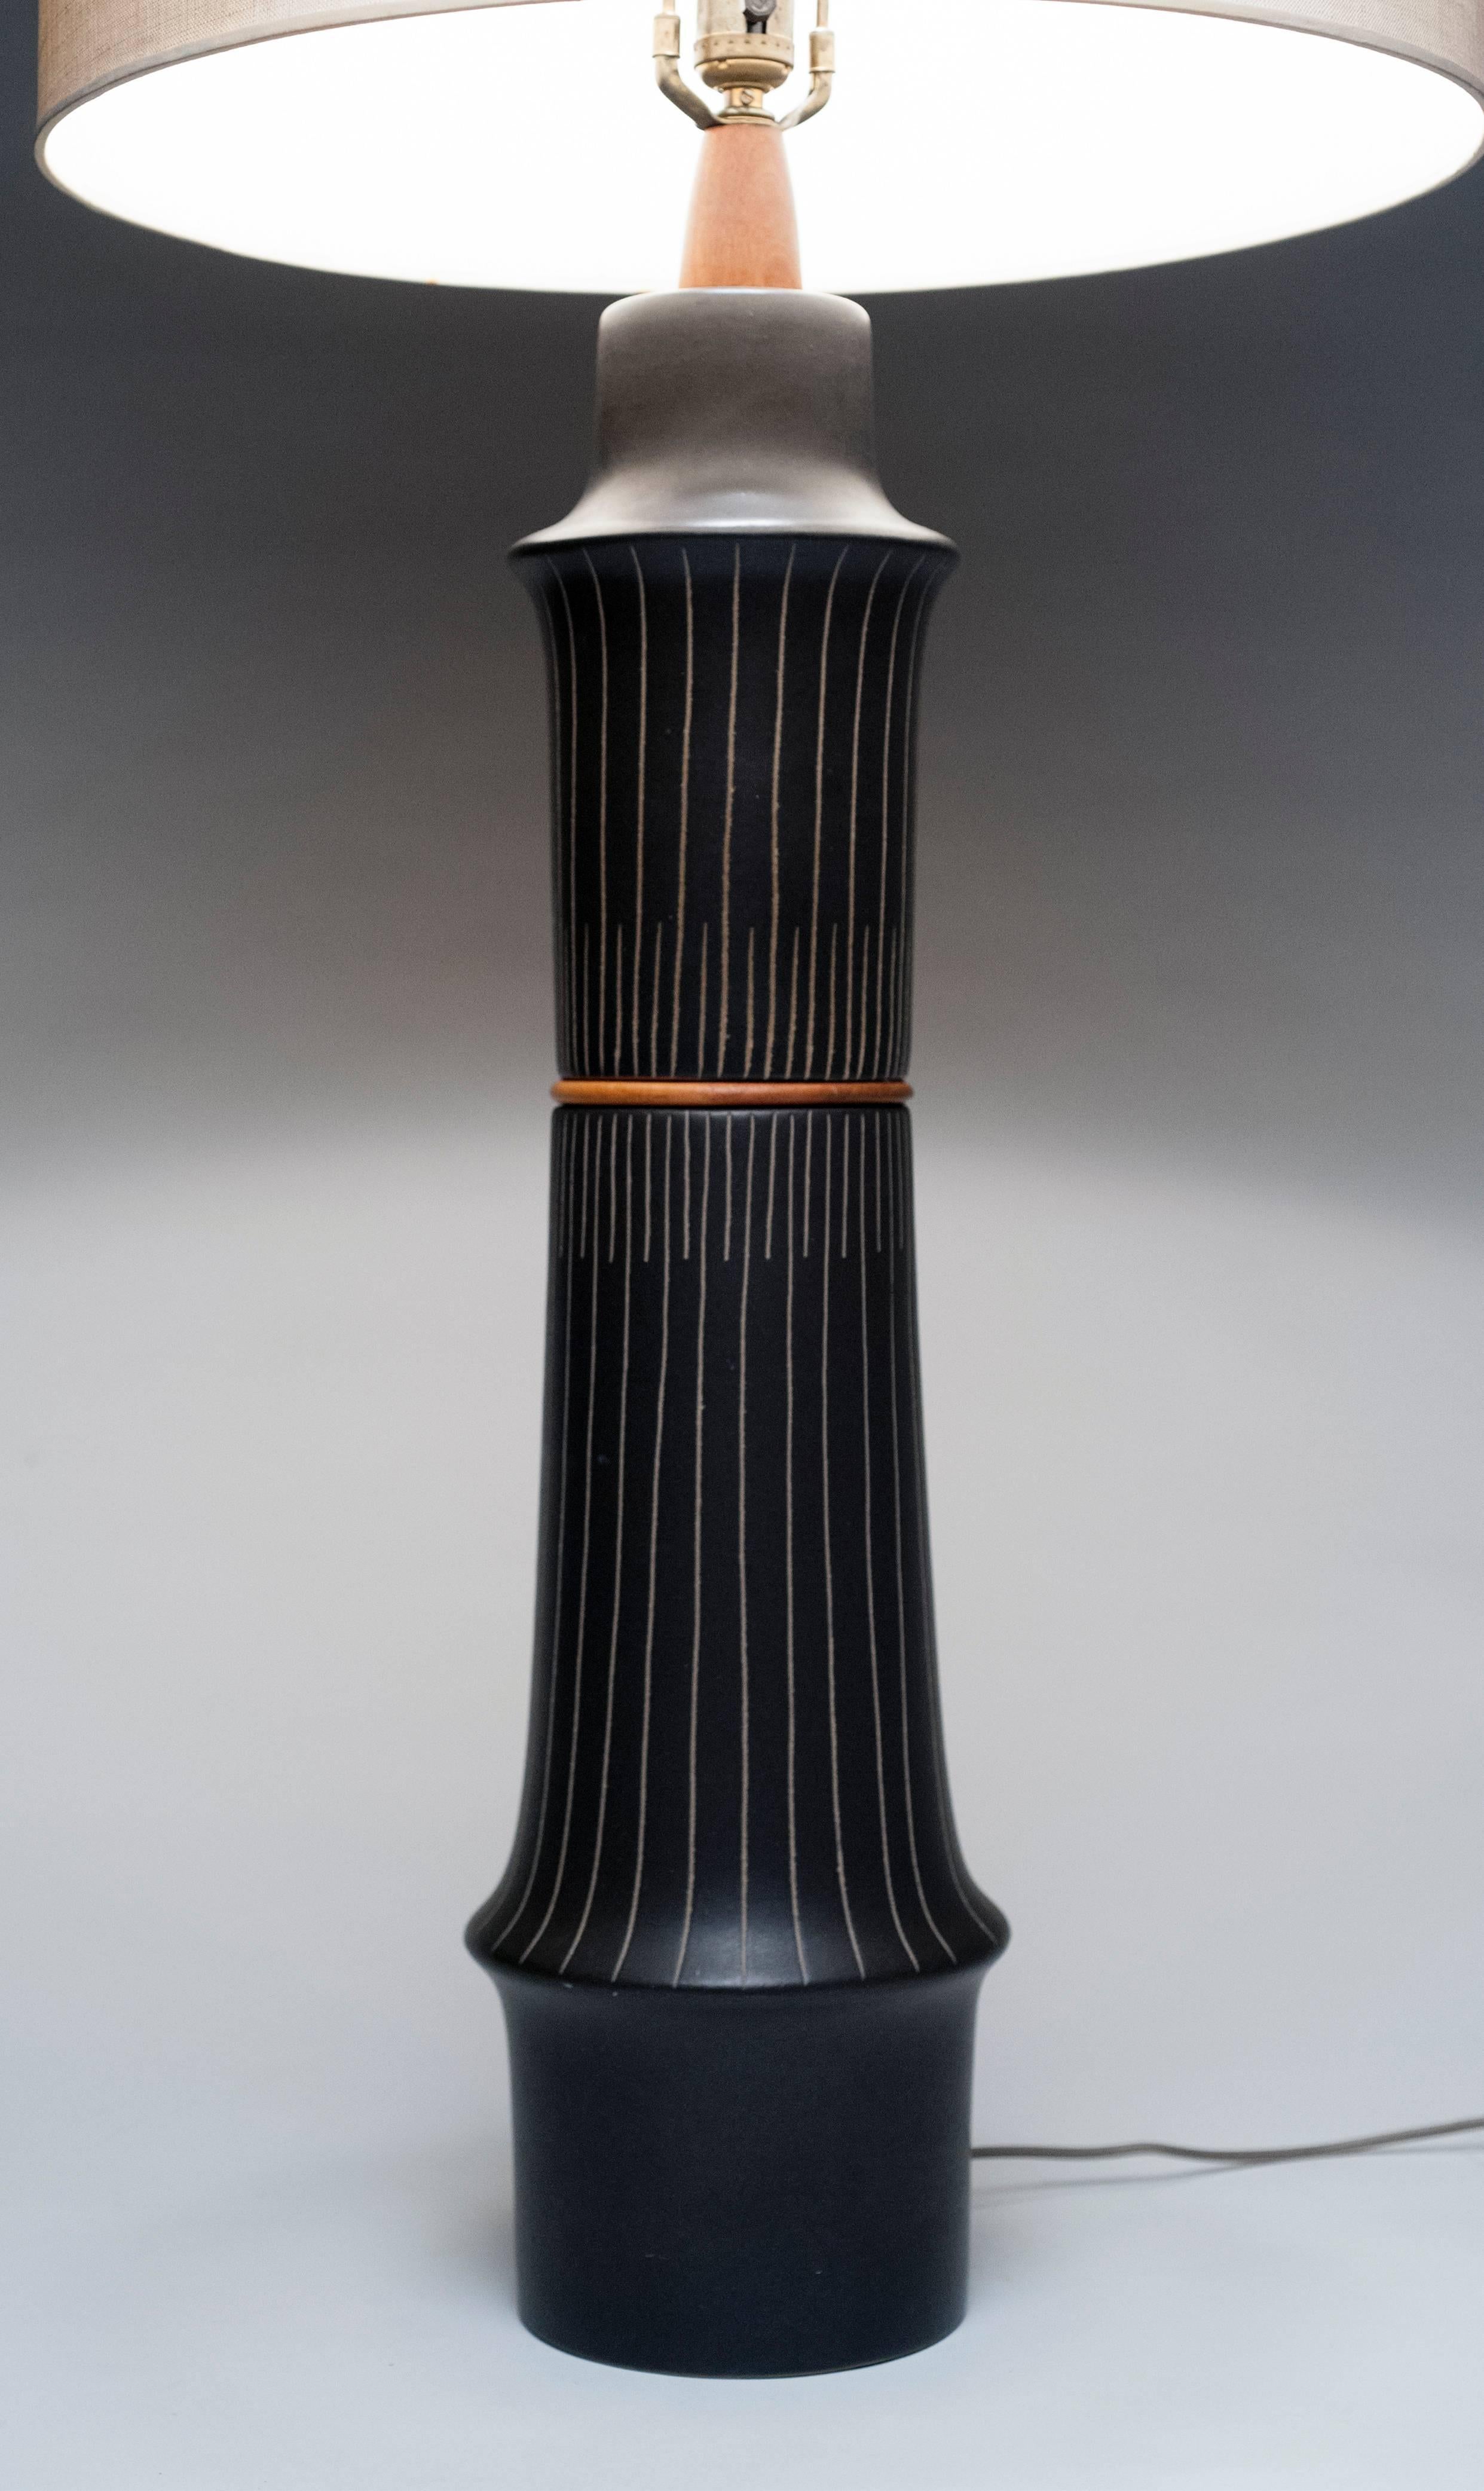 Desirable large ceramic lamp by Jane & Gordon Martz for Marshall Studios. This is a hard to find design in black with striking incised design and walnut accents. Condition is excellent and shade is included. With shade, lamp is 45.75